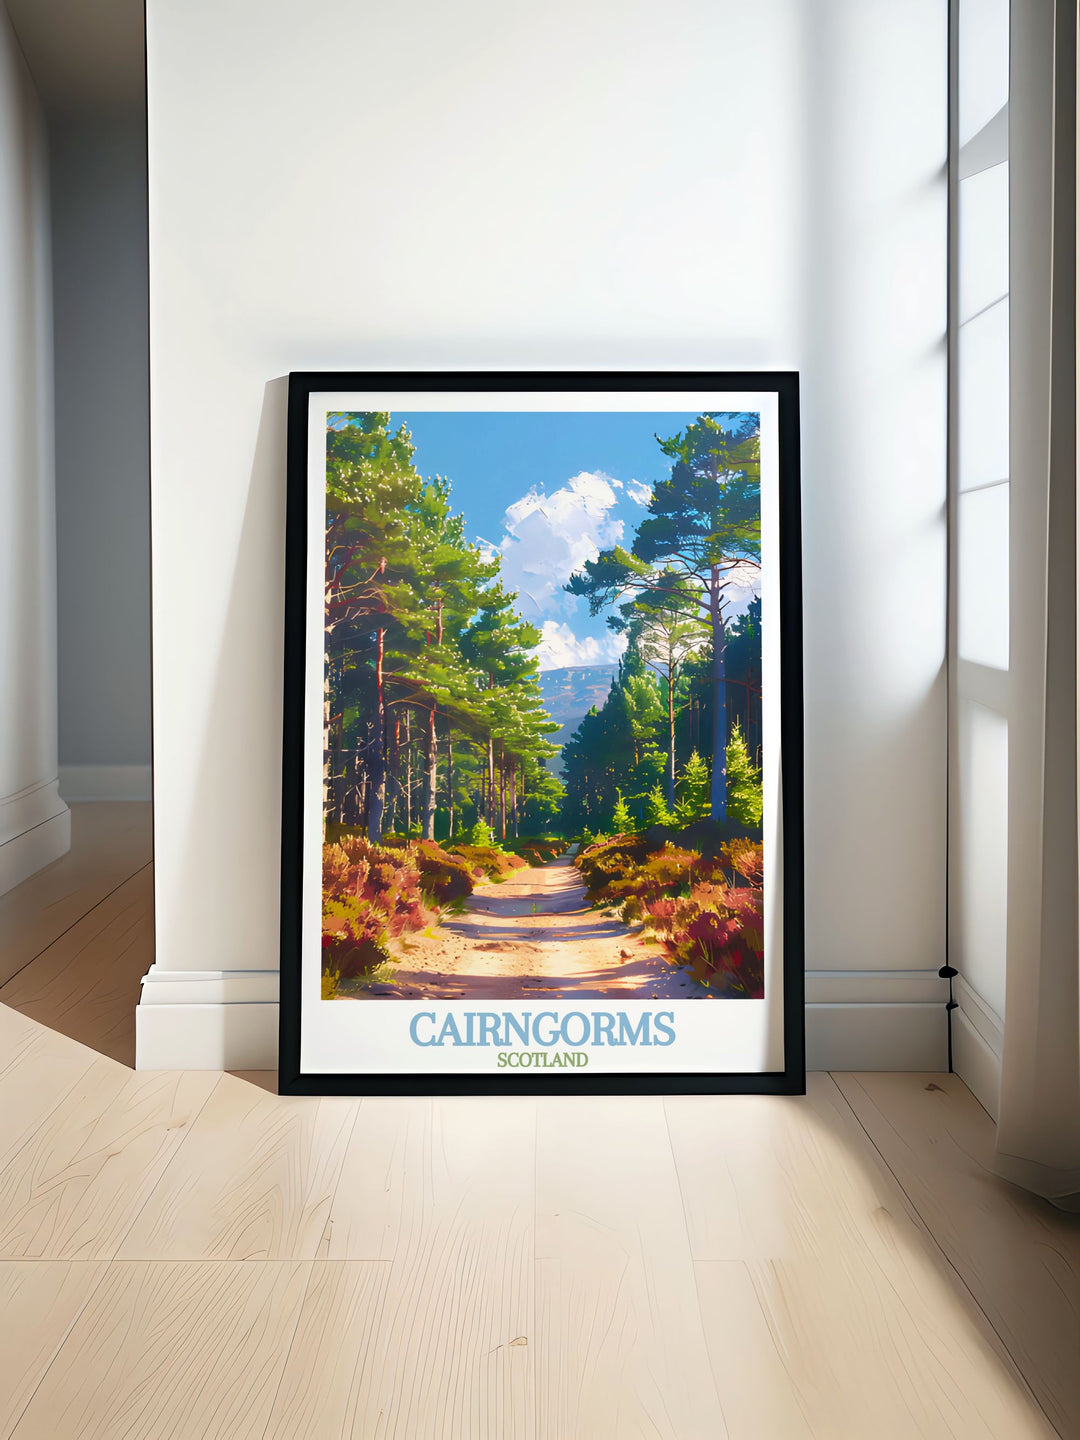 Rothiemurchus Forest travel poster capturing the enchanting beauty of the Cairngorms. Perfect for adding a touch of Scotlands natural charm to your home or office decor. This wall art showcases the serene landscapes and majestic forests of Rothiemurchus.